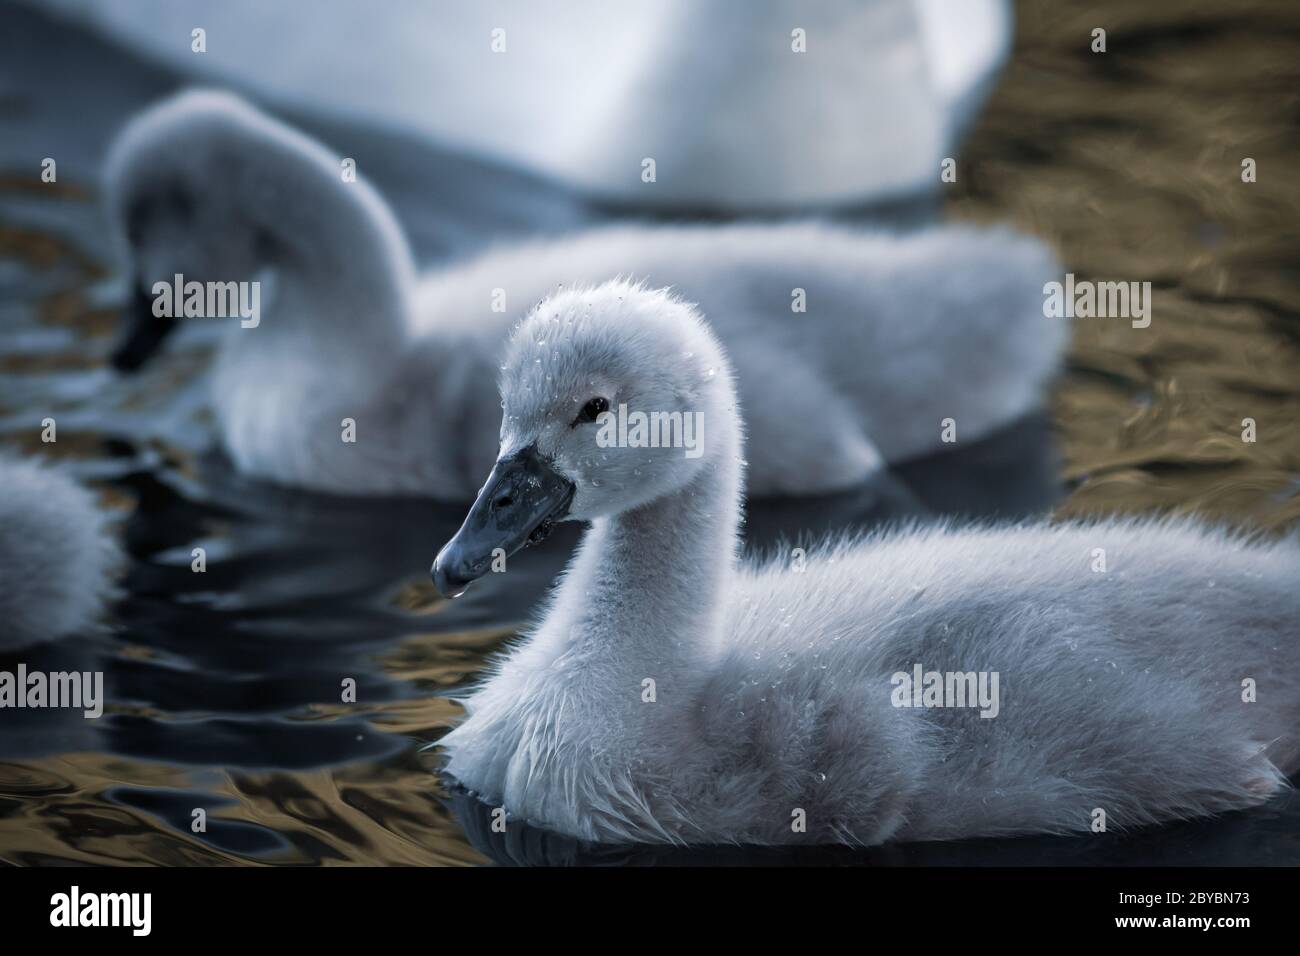 chicks of a white swan playing the pond water close up selective focus blur background Stock Photo